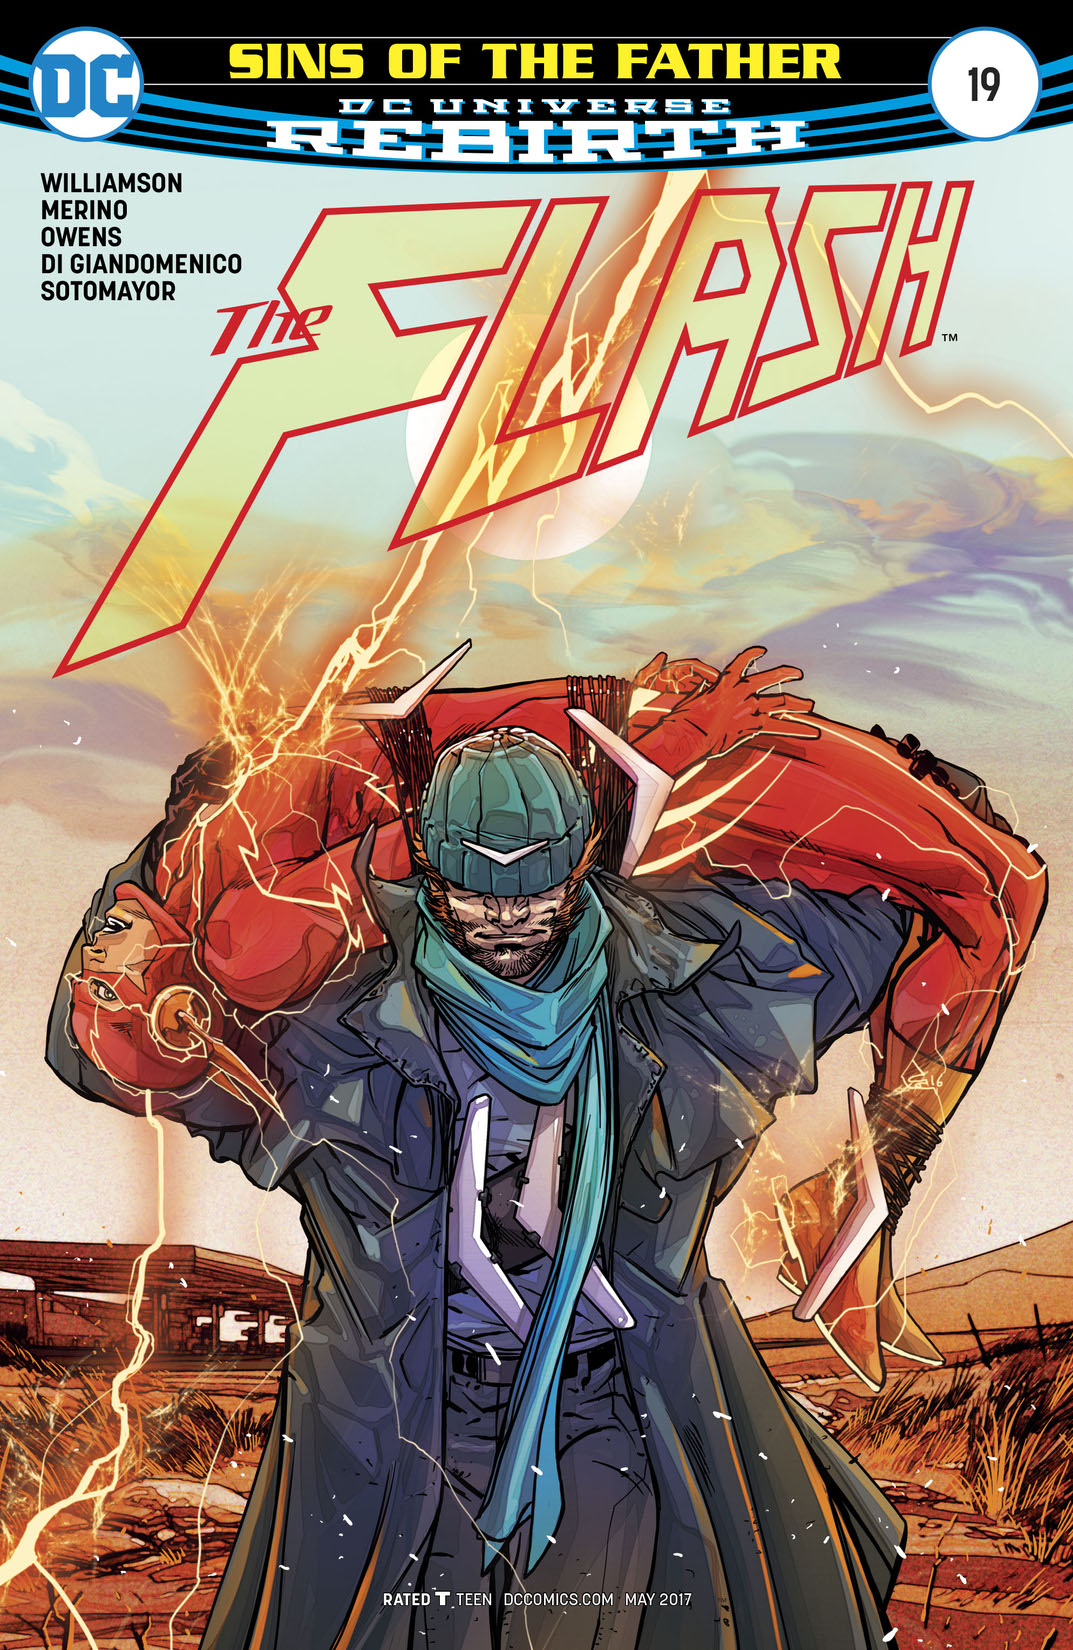 The Flash (2016-) #19 preview images